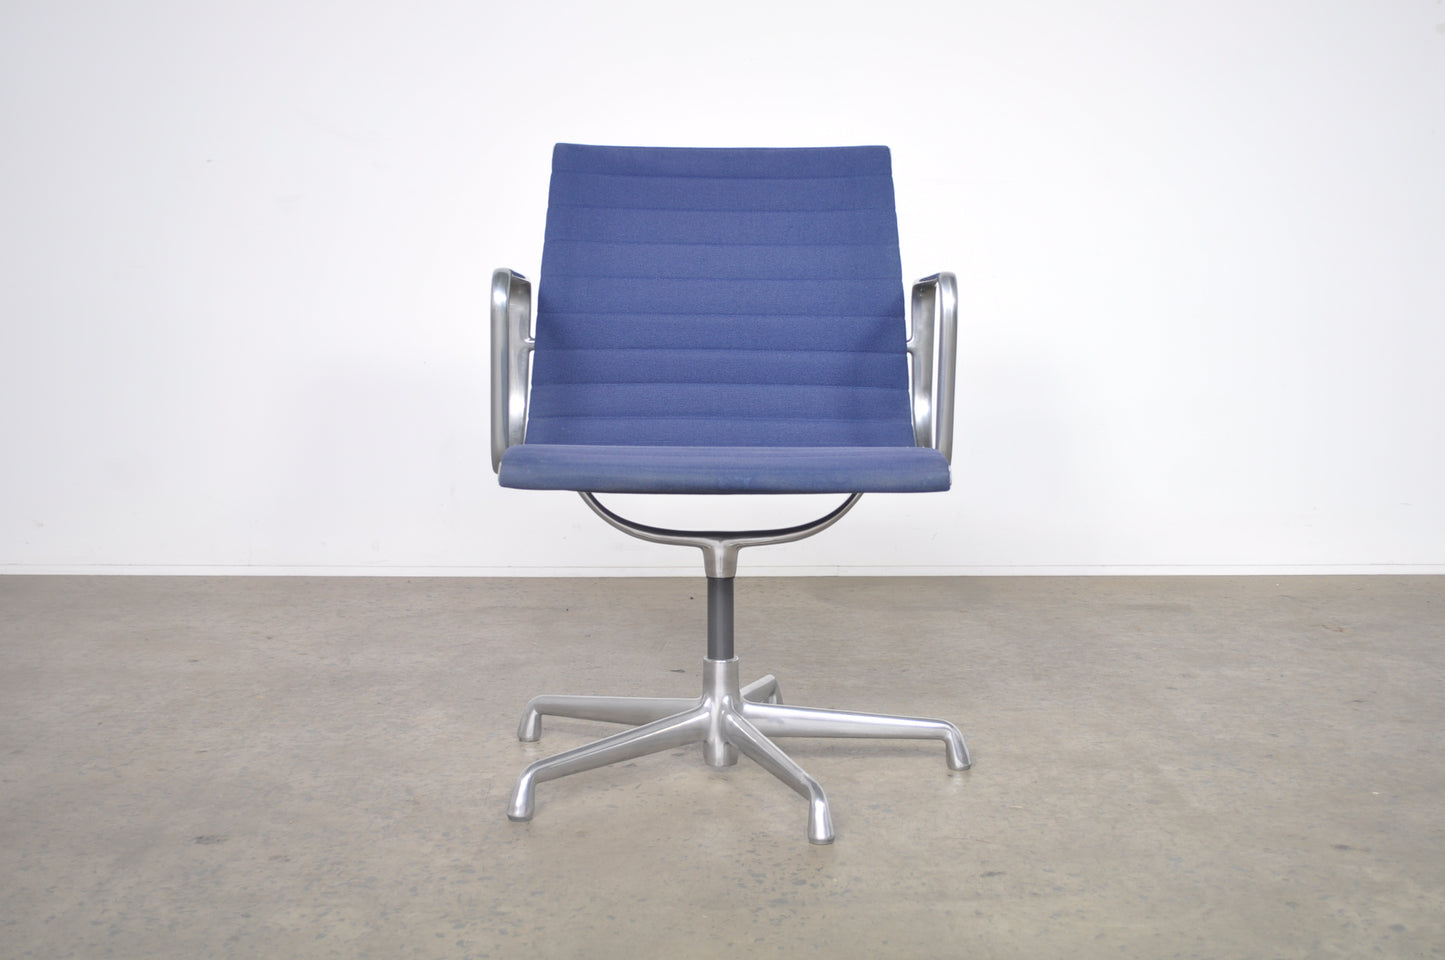 Eames Aluminium Group side chair with arms.